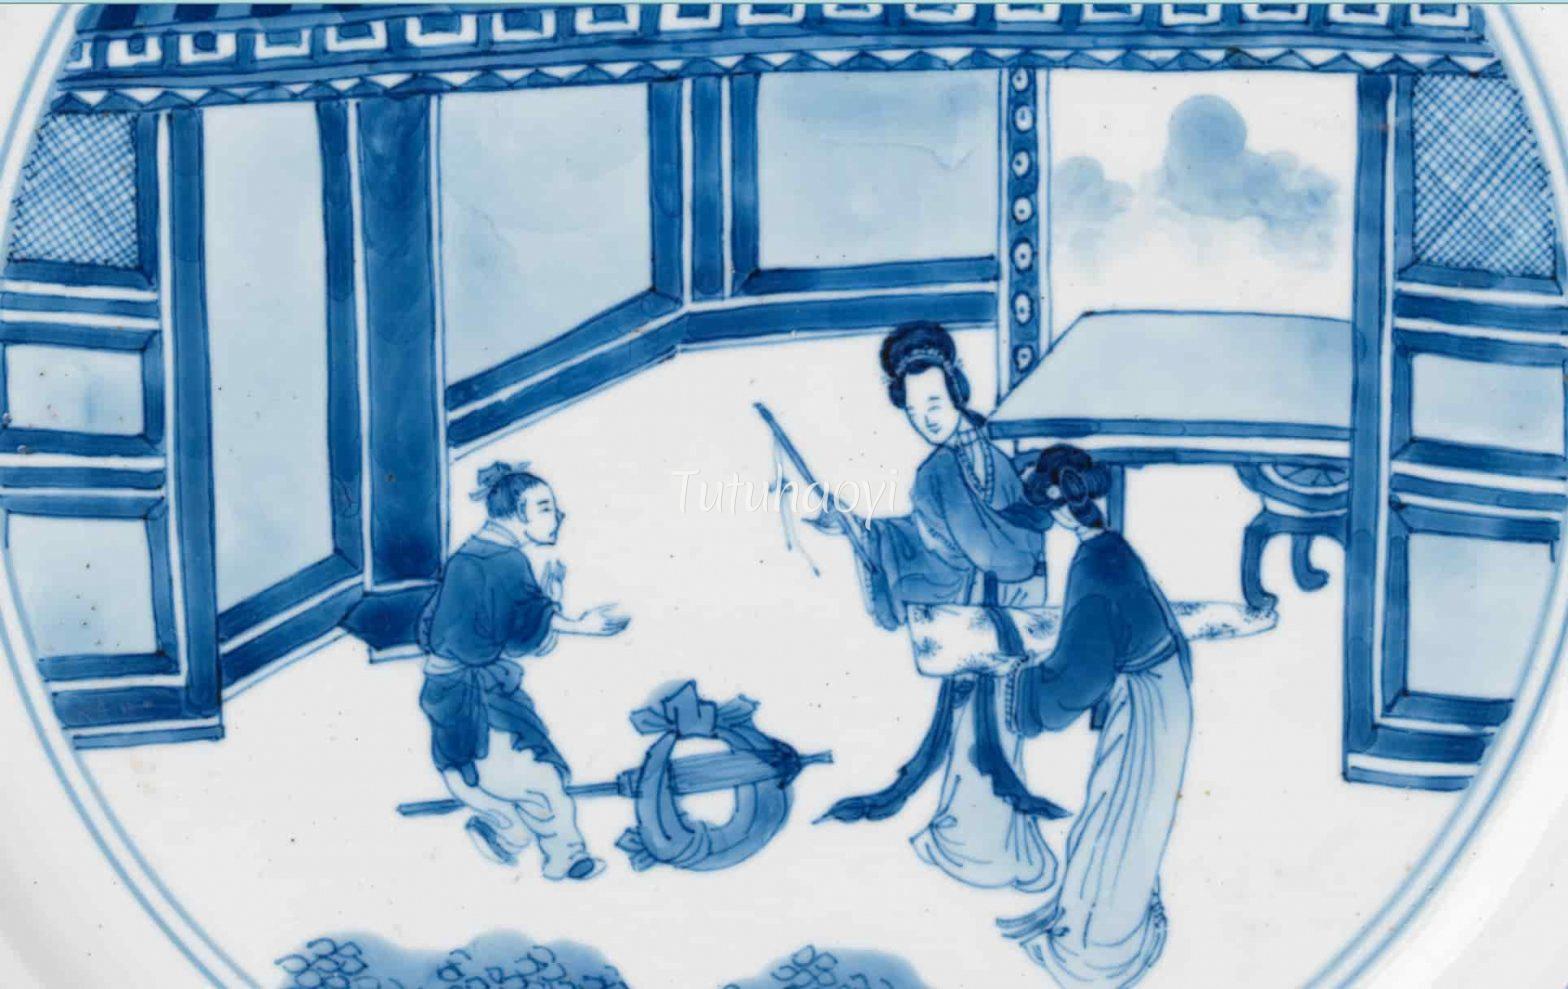 Cui Yingying asking page boy to bring flute and Zither to Scholar Zhang